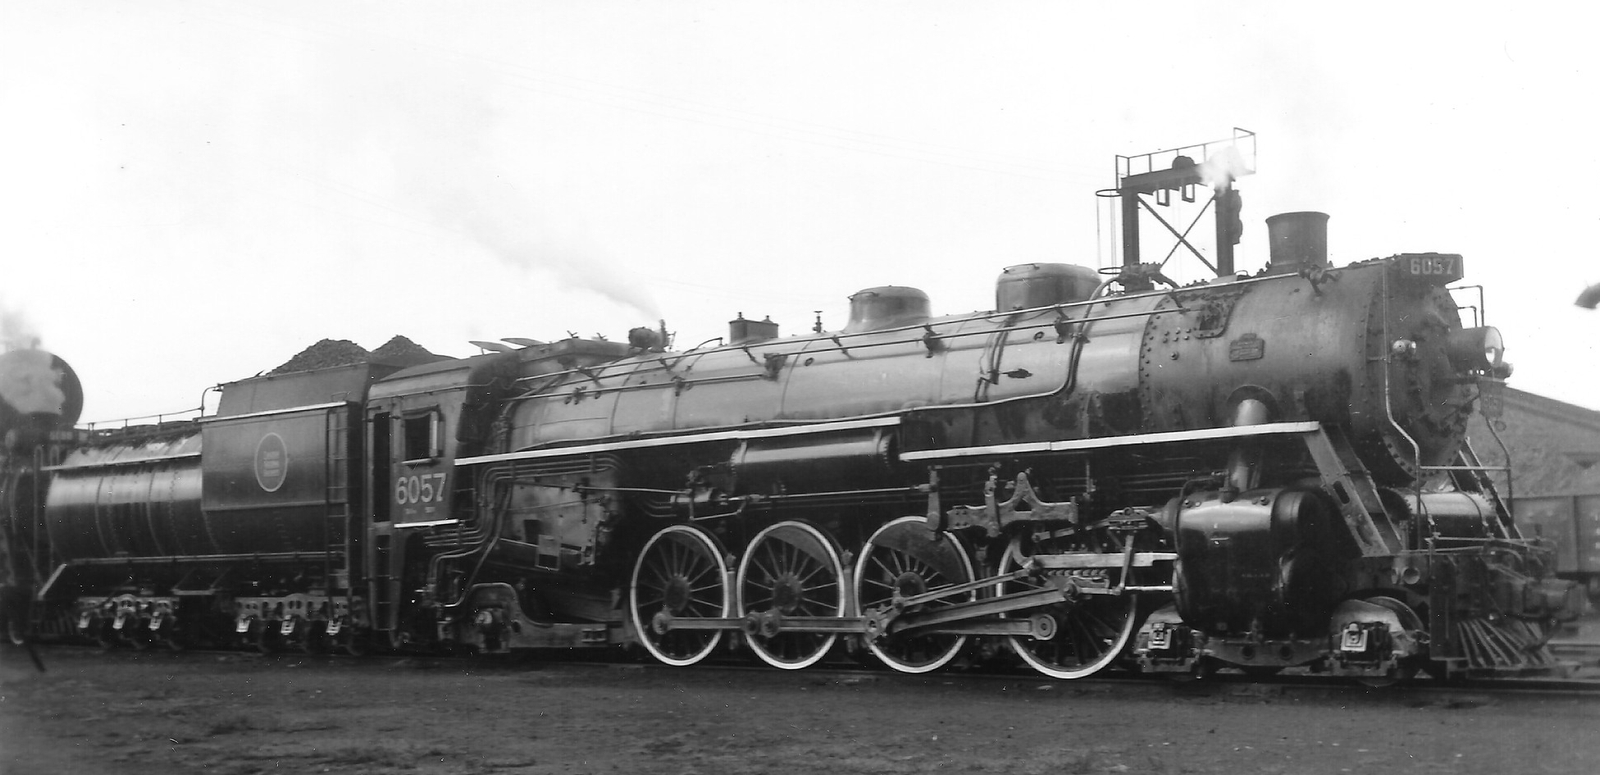 U-1e No. 6057 in August 1957 at Fort Rouge, Winnipeg